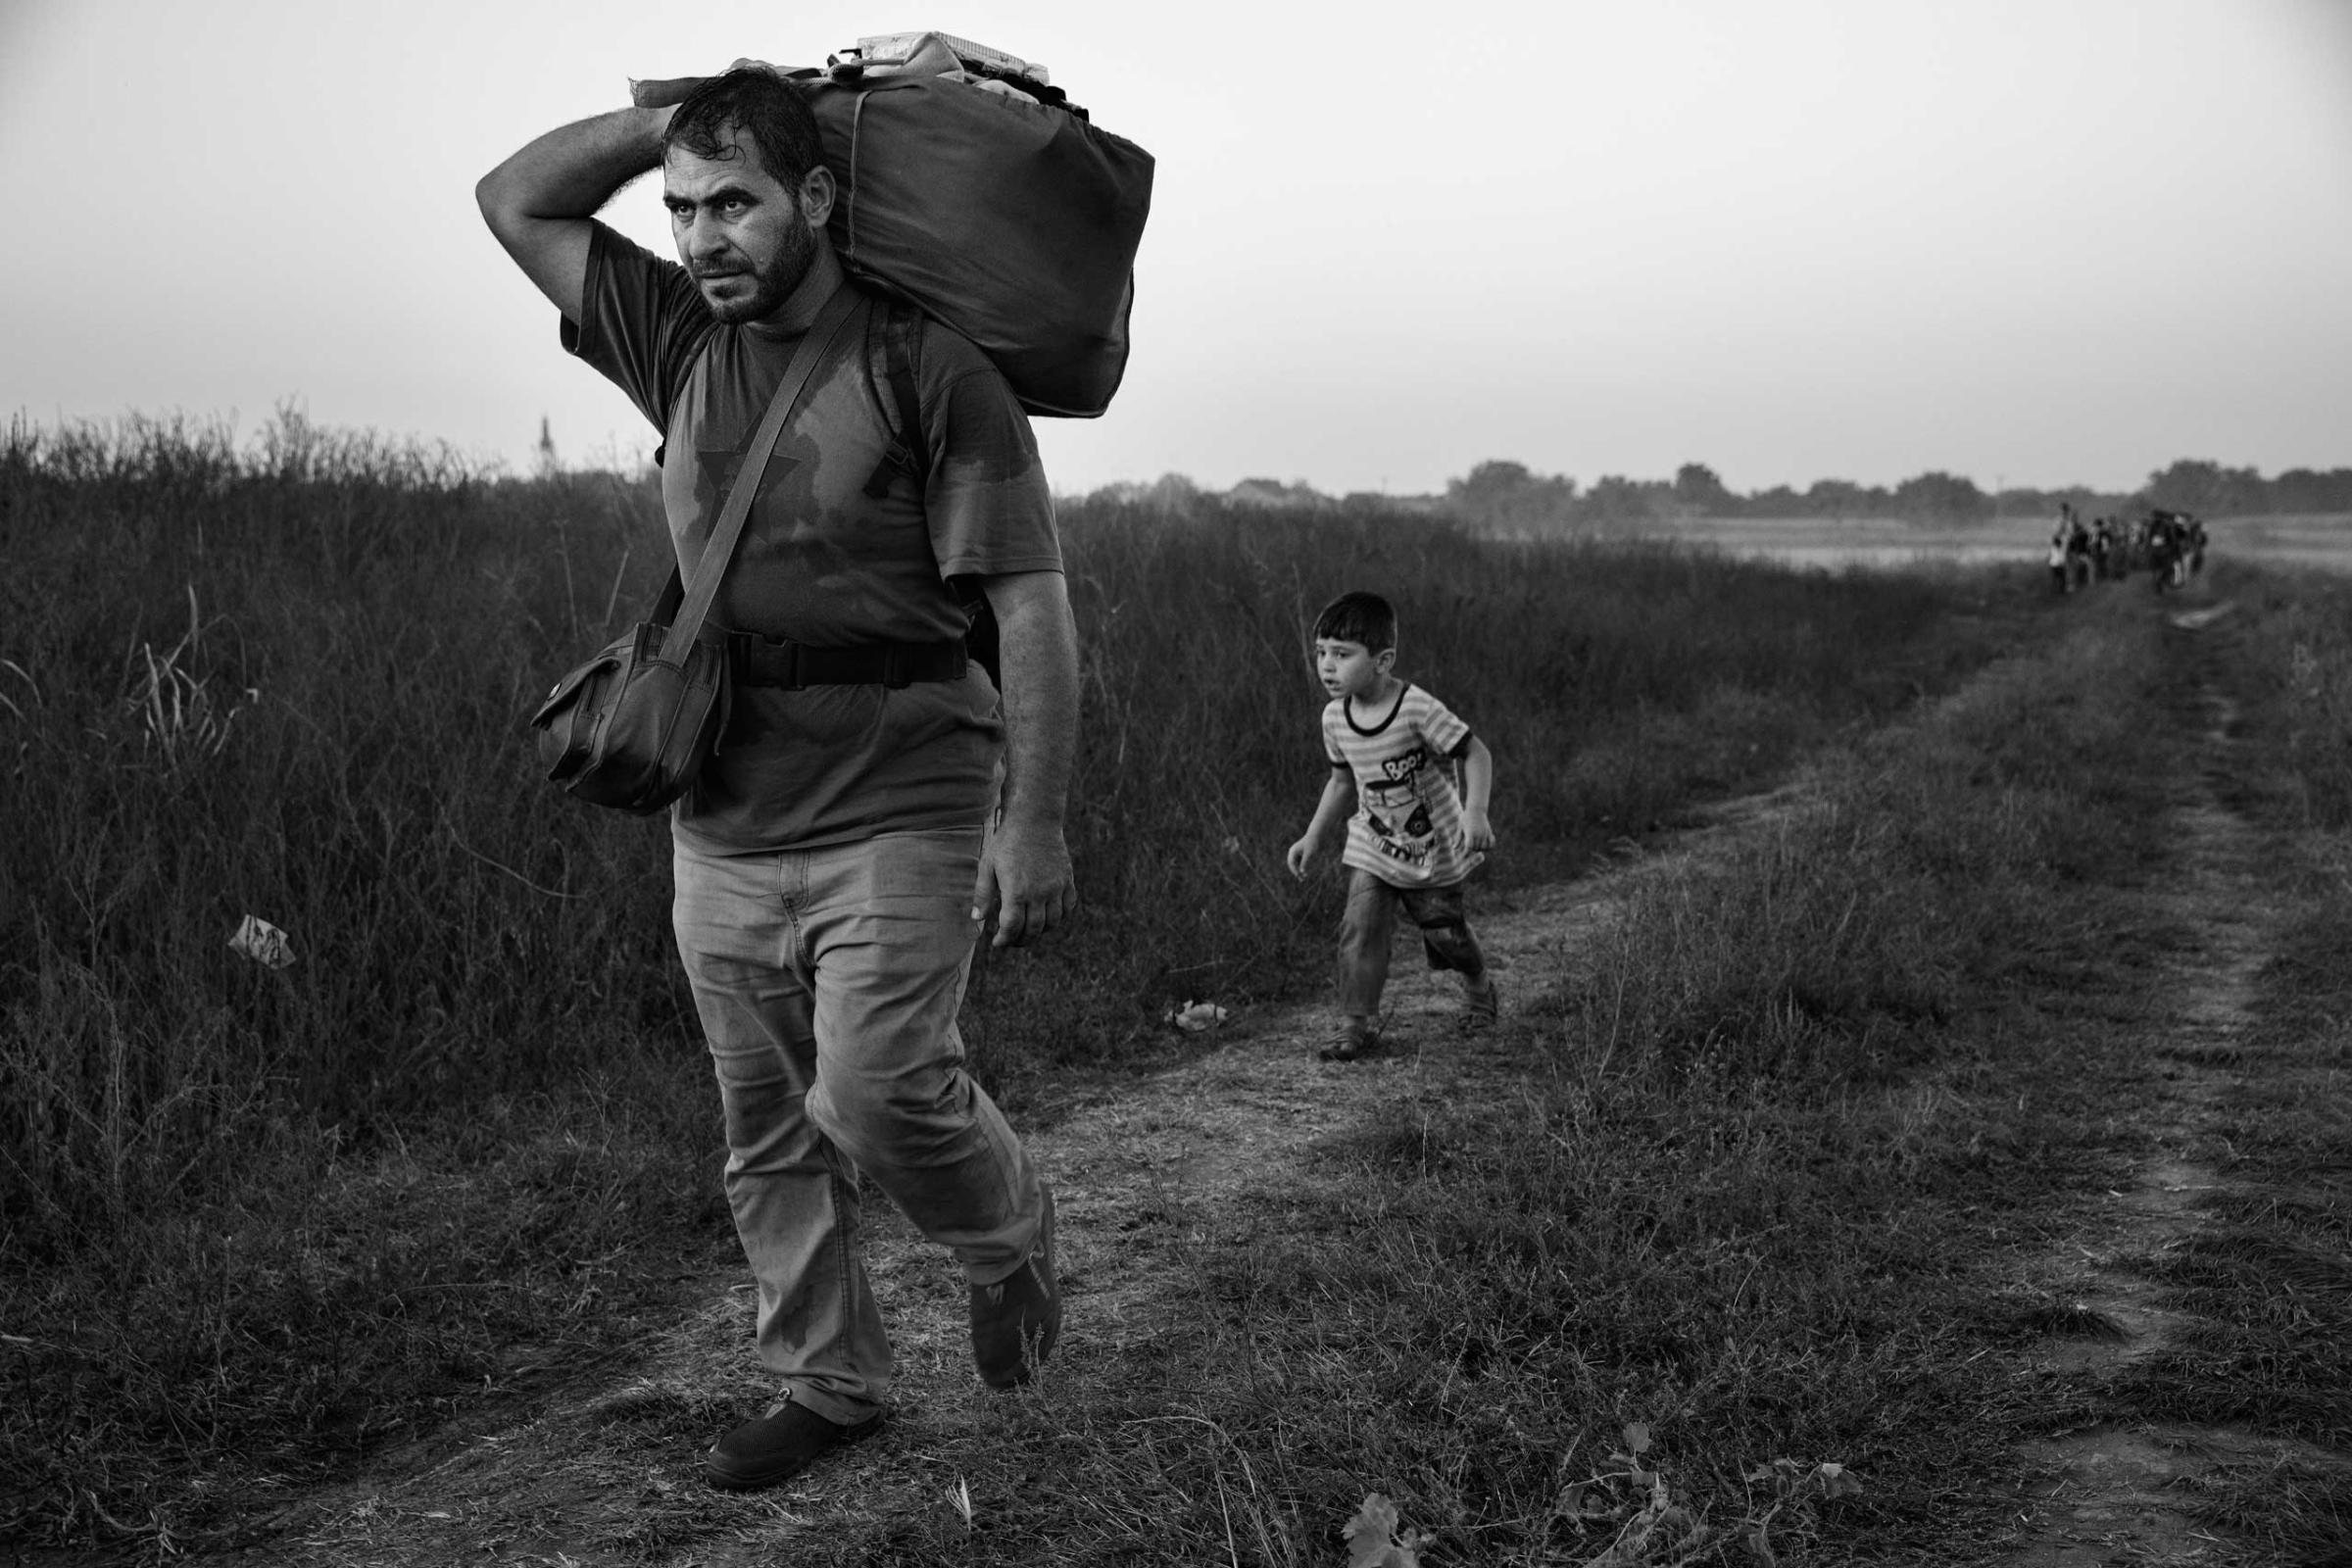 A man walks with his son behind him as they make their way to the train station in Tovarnik, Croatia, on the border with Serbia. In the Balkans, many migrants began traveling by foot, echoing more ancient journeys, September 17, 2015 James Nachtwey for TIME